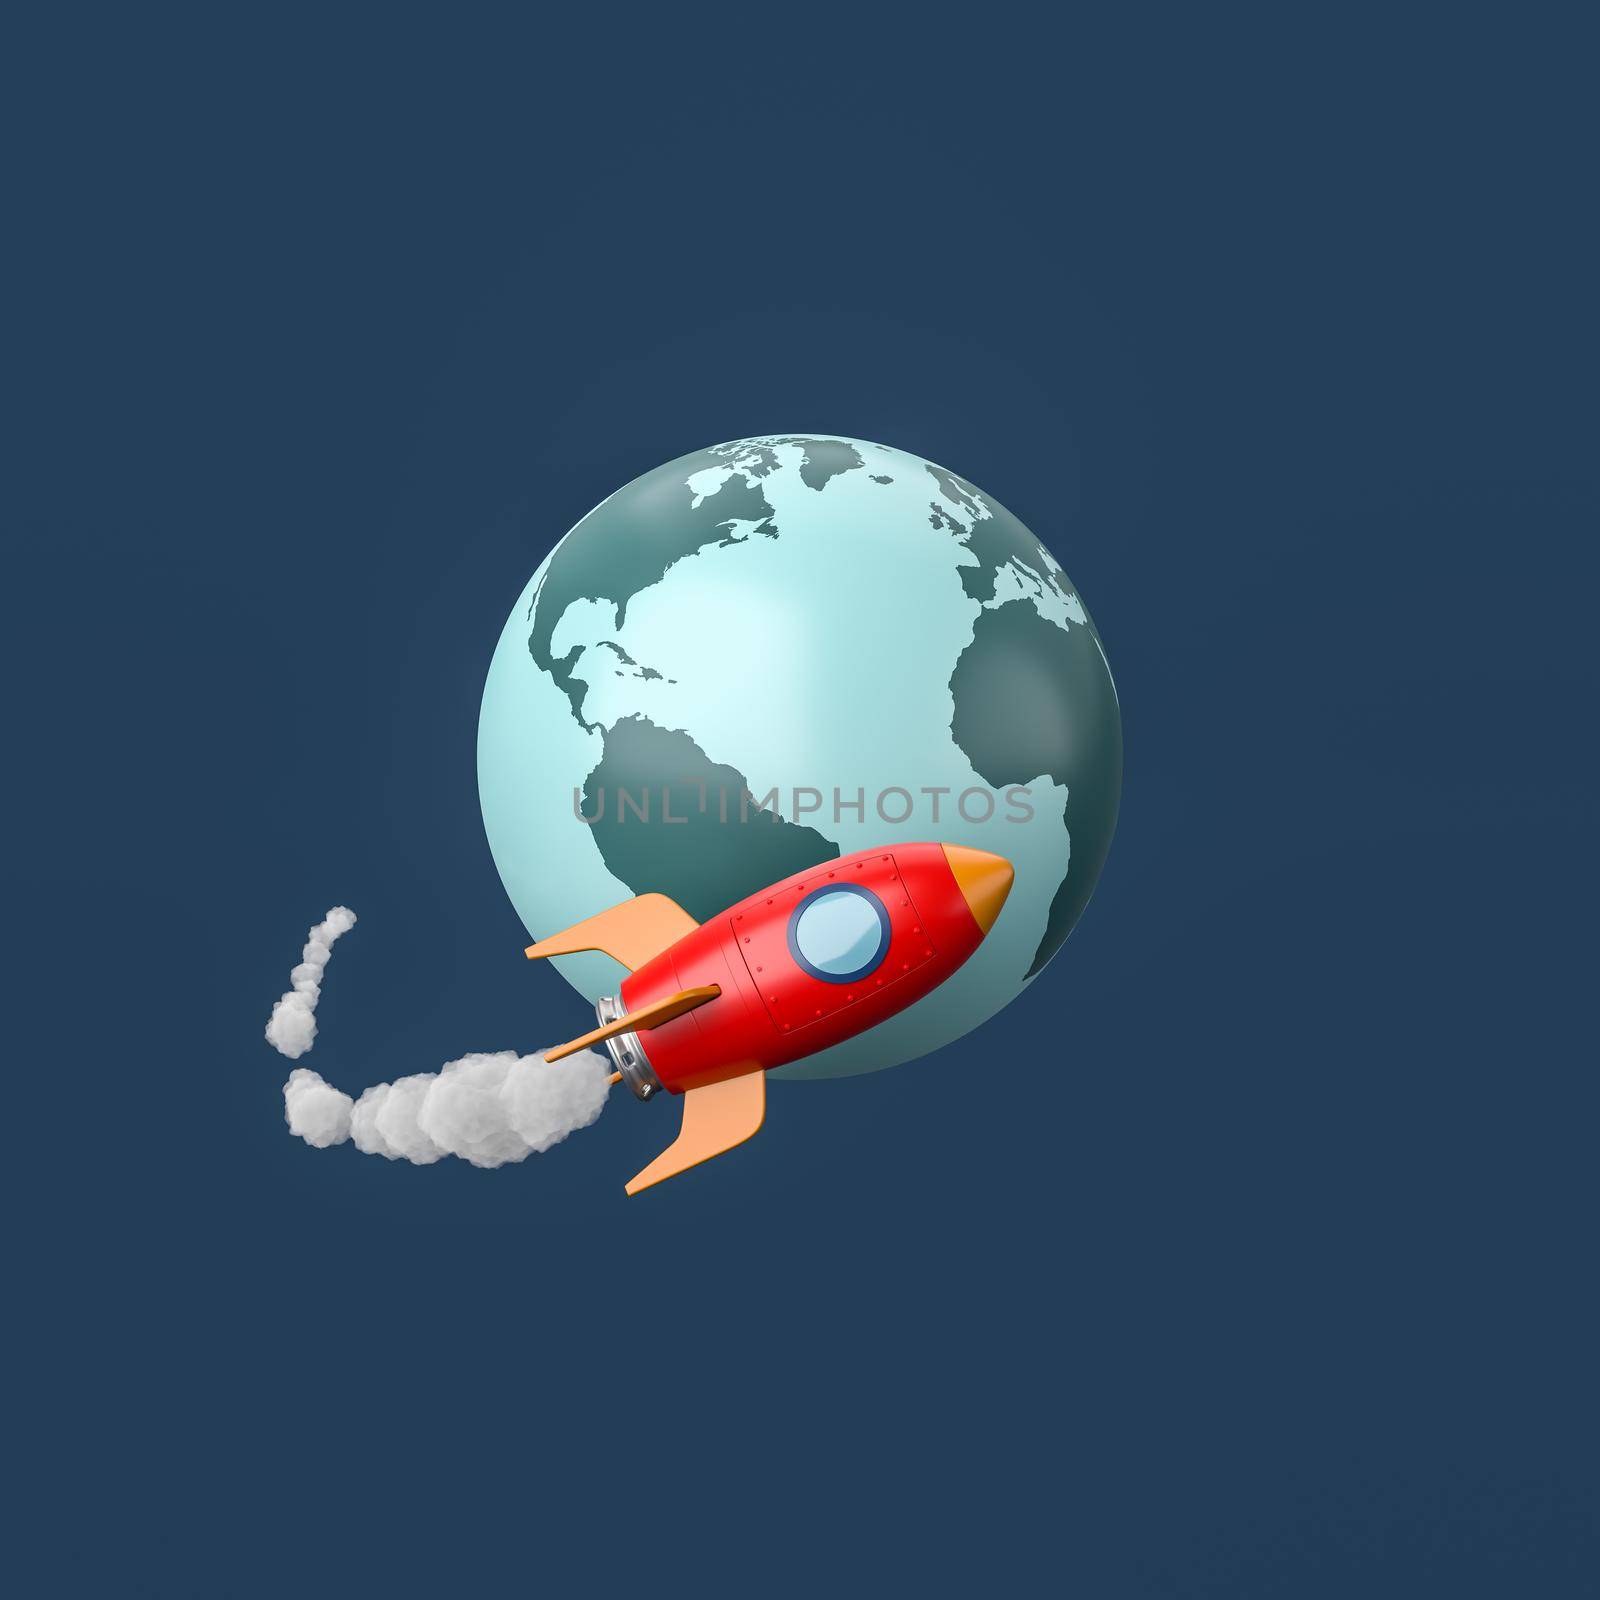 Red Cartoon Spaceship Flying around the Earth Planet Isolated on Flat Blue Background 3D Illustration, Space Travel Concept